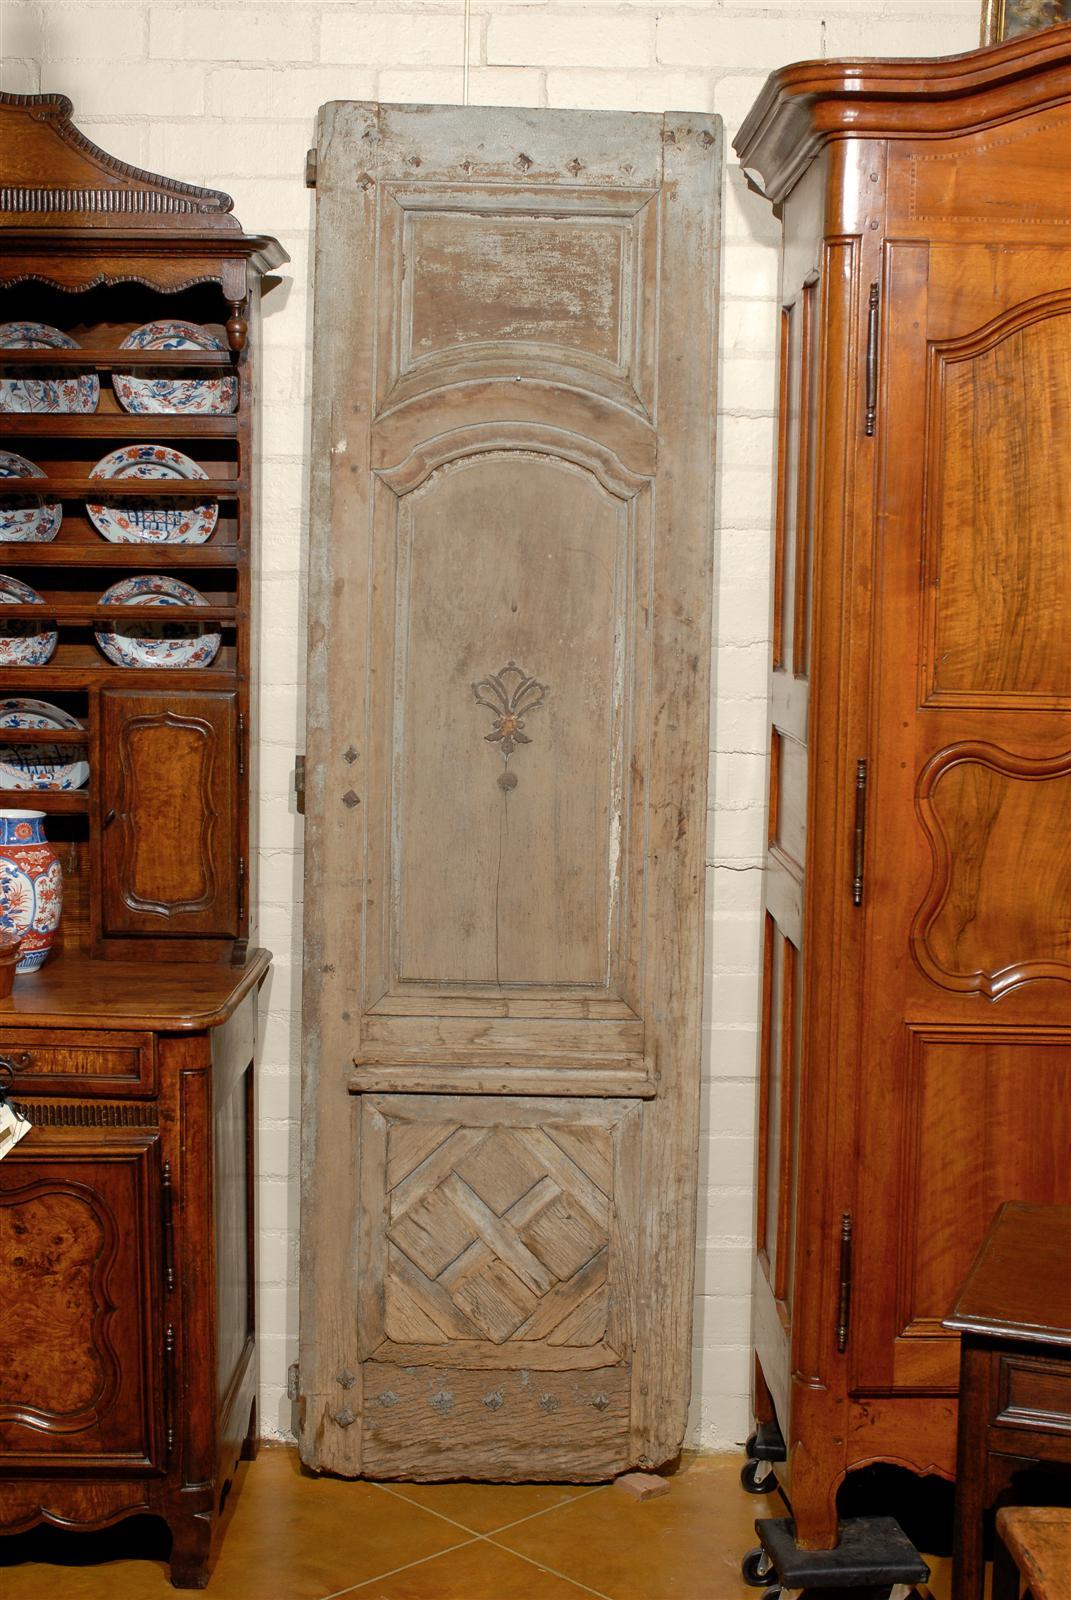 A pair of large 18th century French doors.